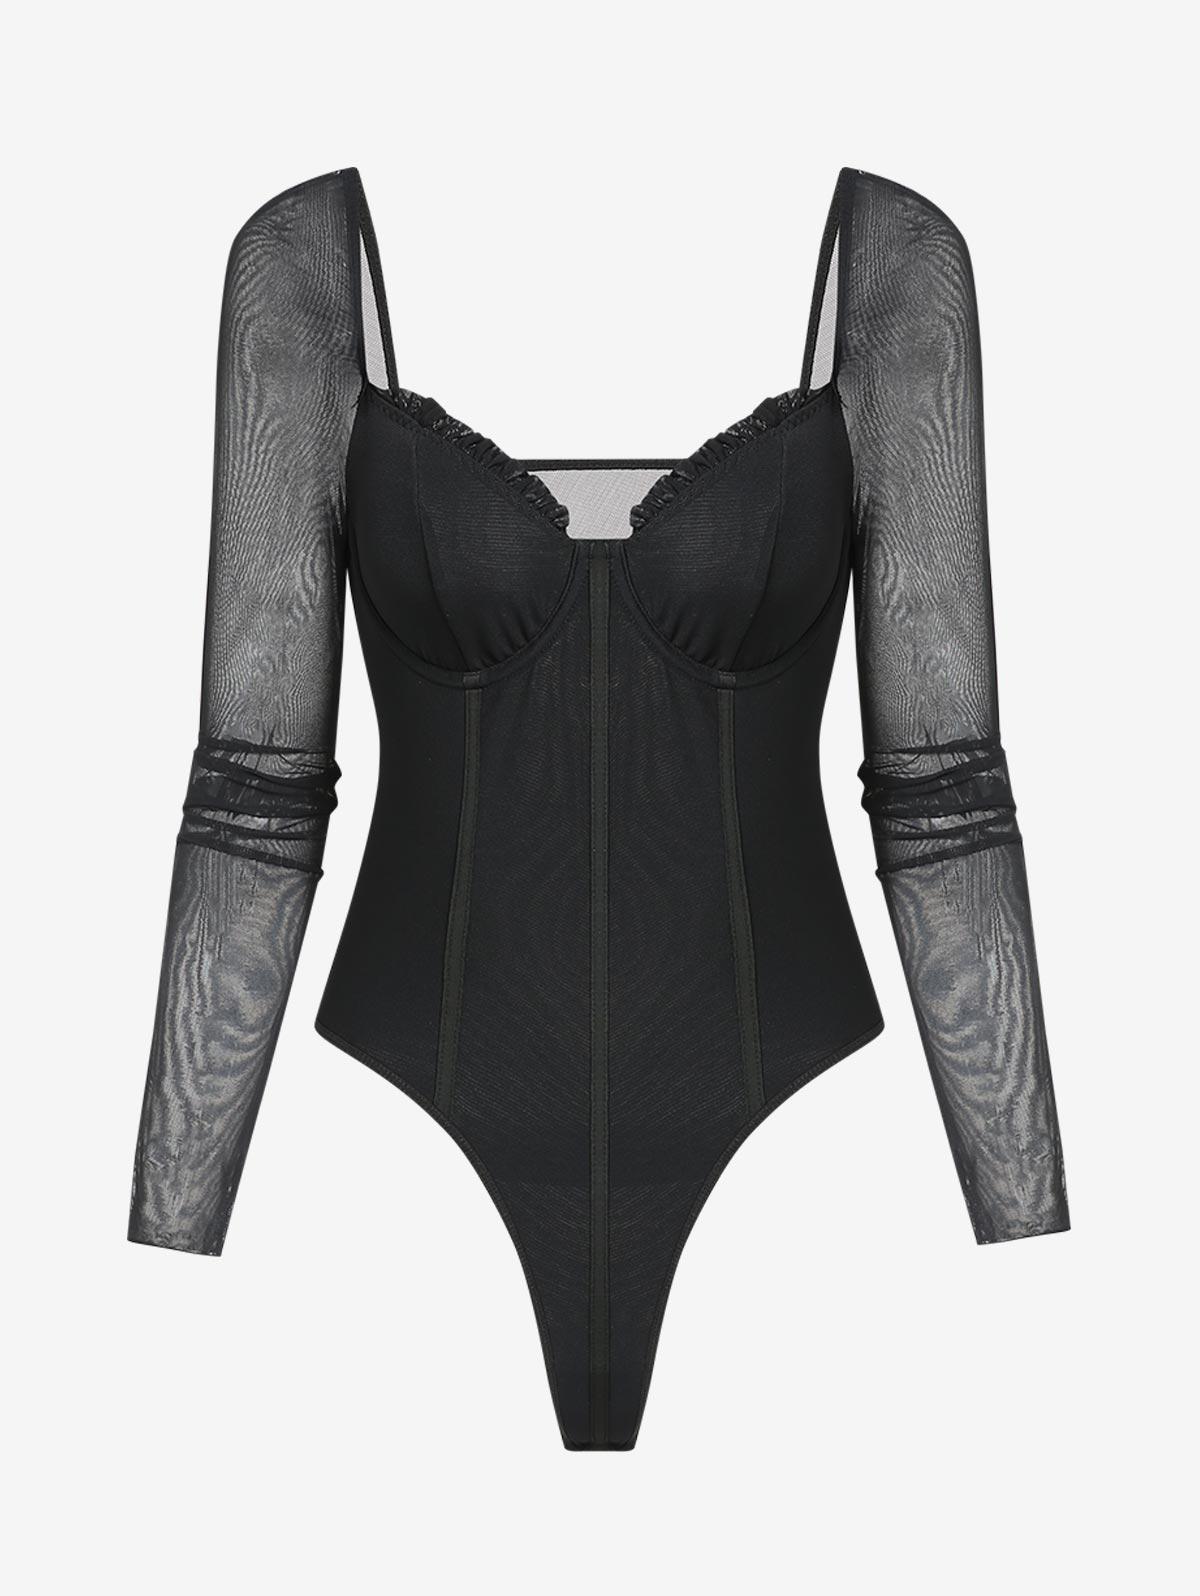 Zaful Sexy Sheer See Through Mesh Long Sleeves Underwire Ruffles Corset  Style High Leg Bodysuit in Black | Lyst